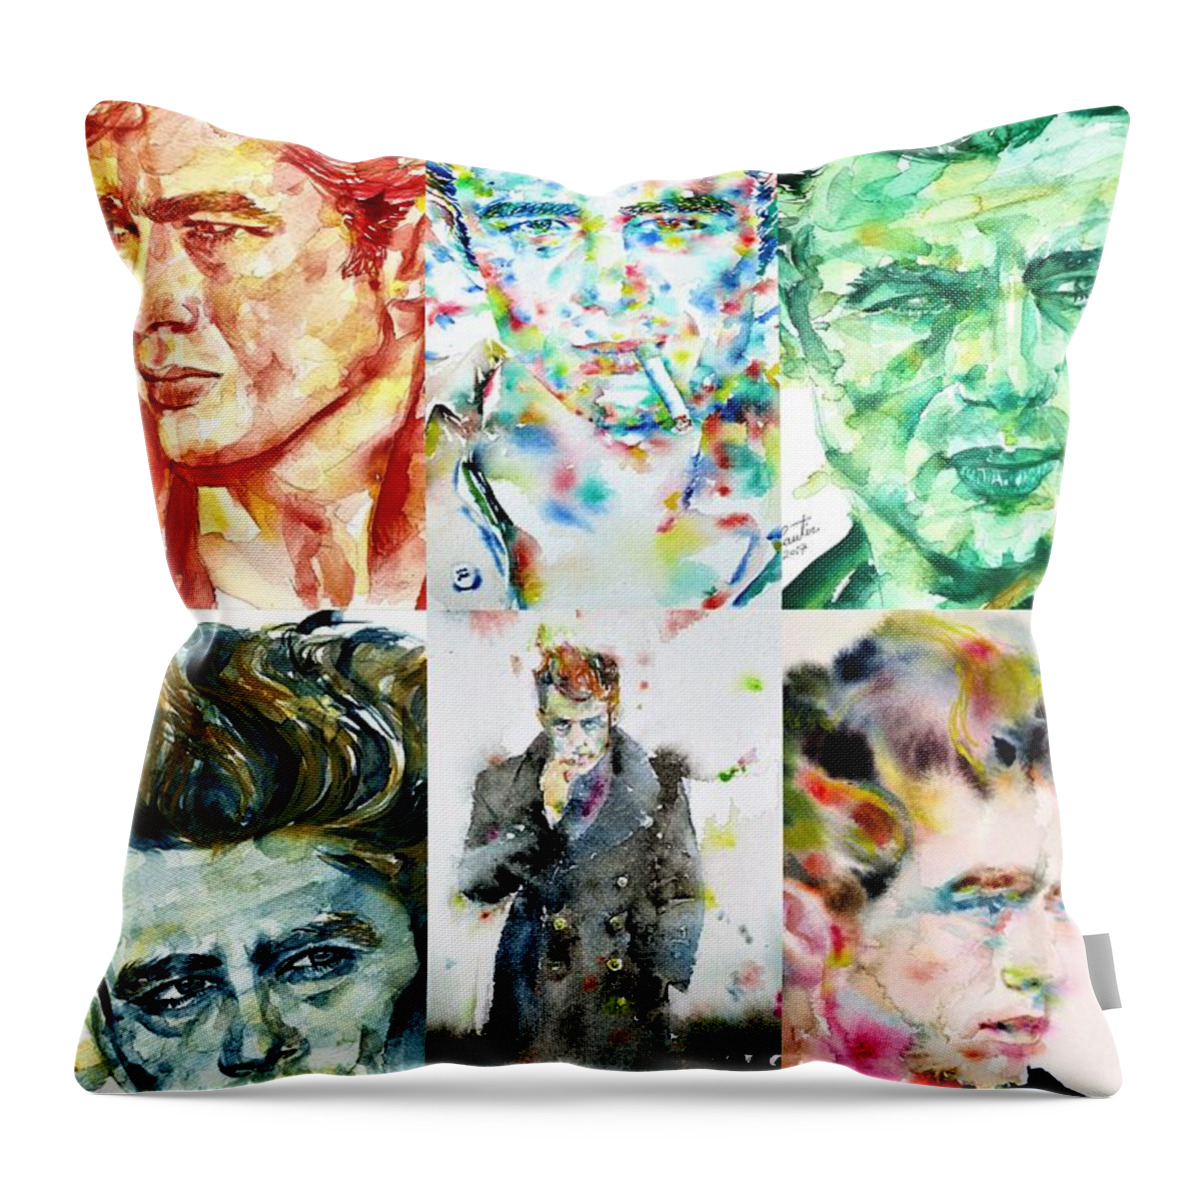 James Dean Throw Pillow featuring the painting Six Times James Dean by Fabrizio Cassetta